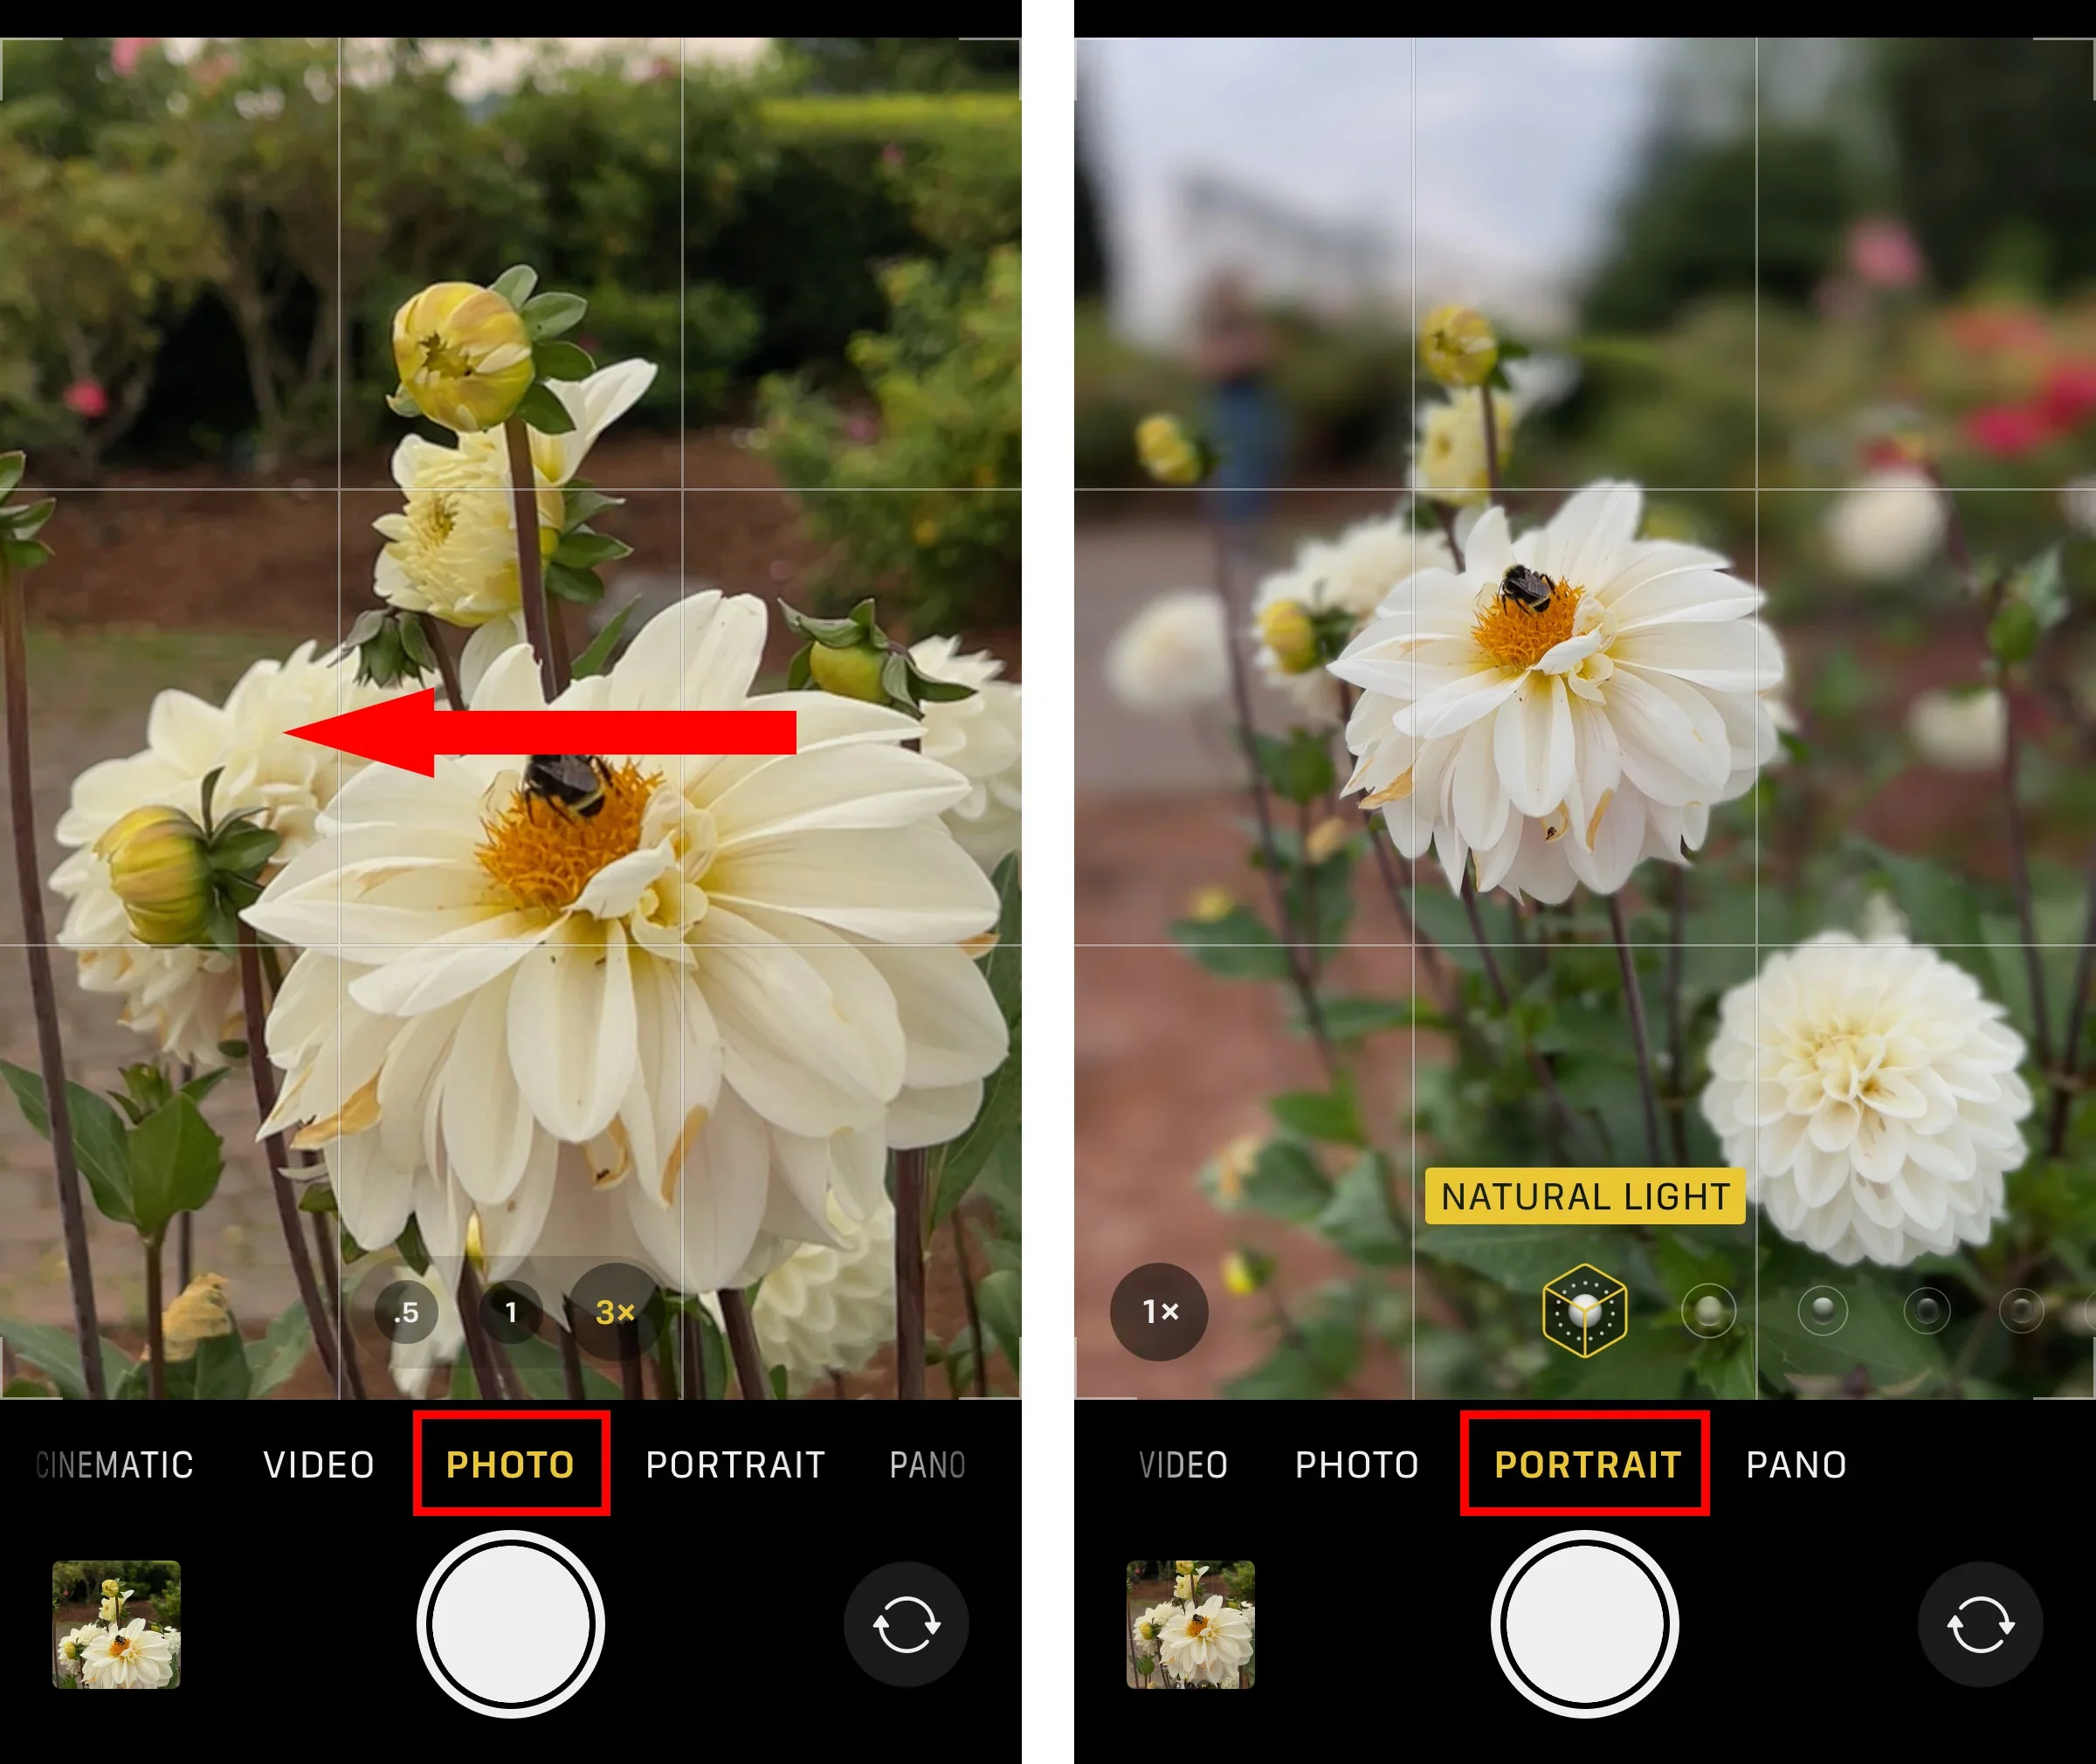 A smartphone camera has cool hidden features - here's how to find them